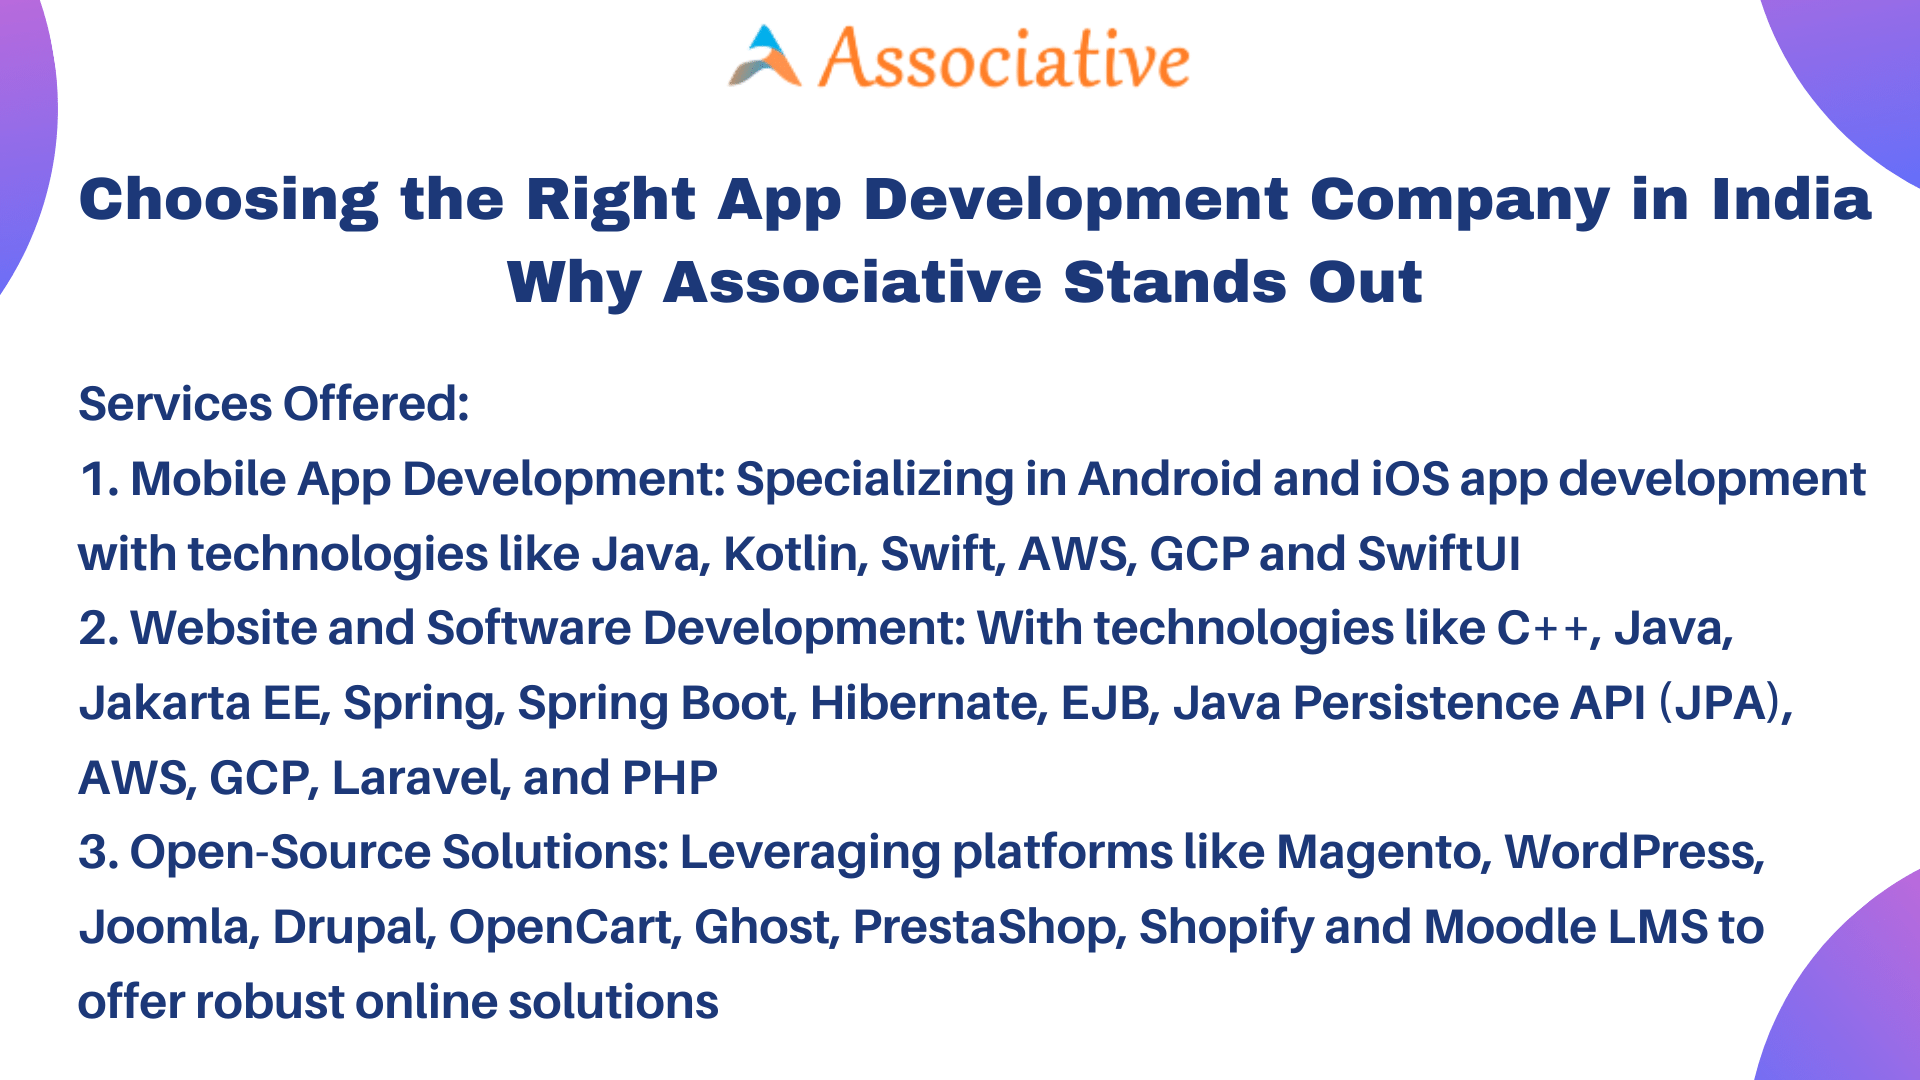 Choosing the Right App Development Company in India Why Associative Stands Out